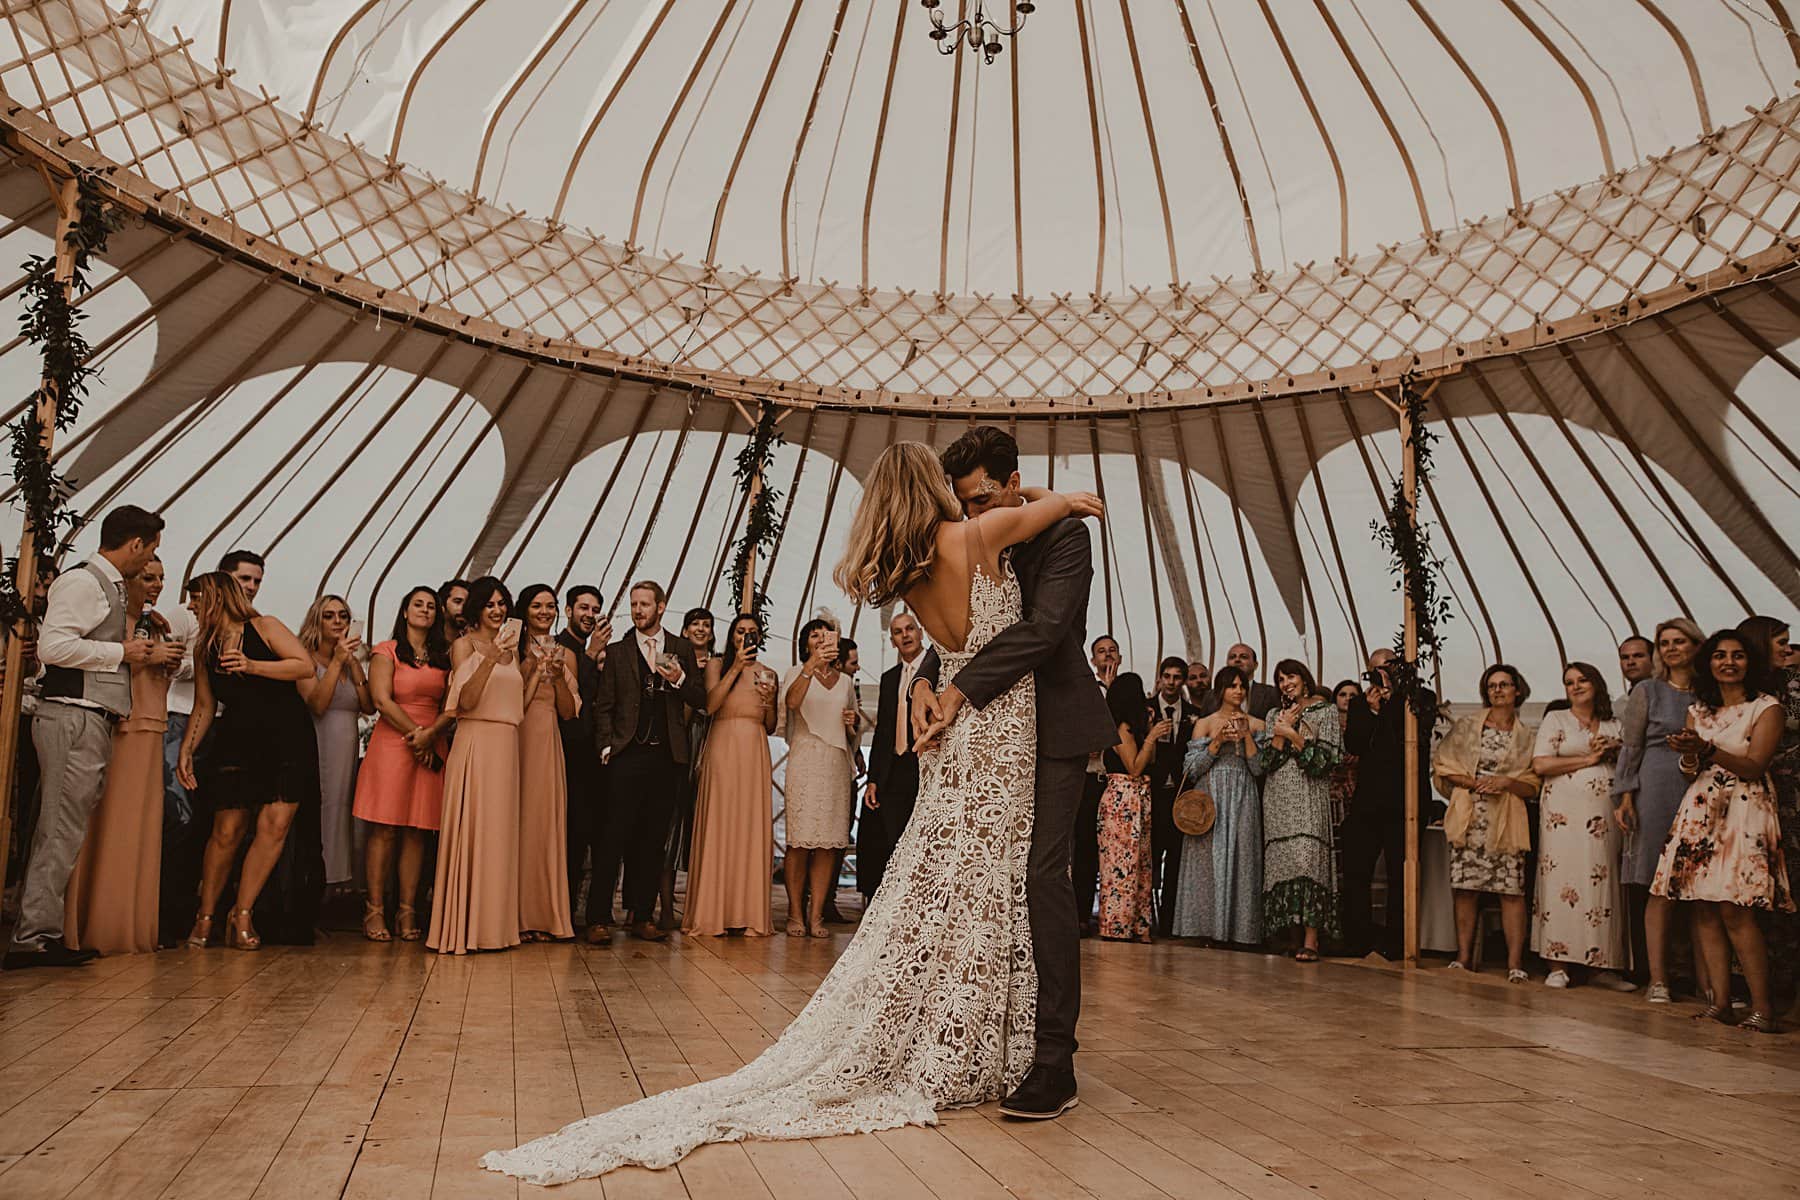 Bride and Groom first dance in yurt